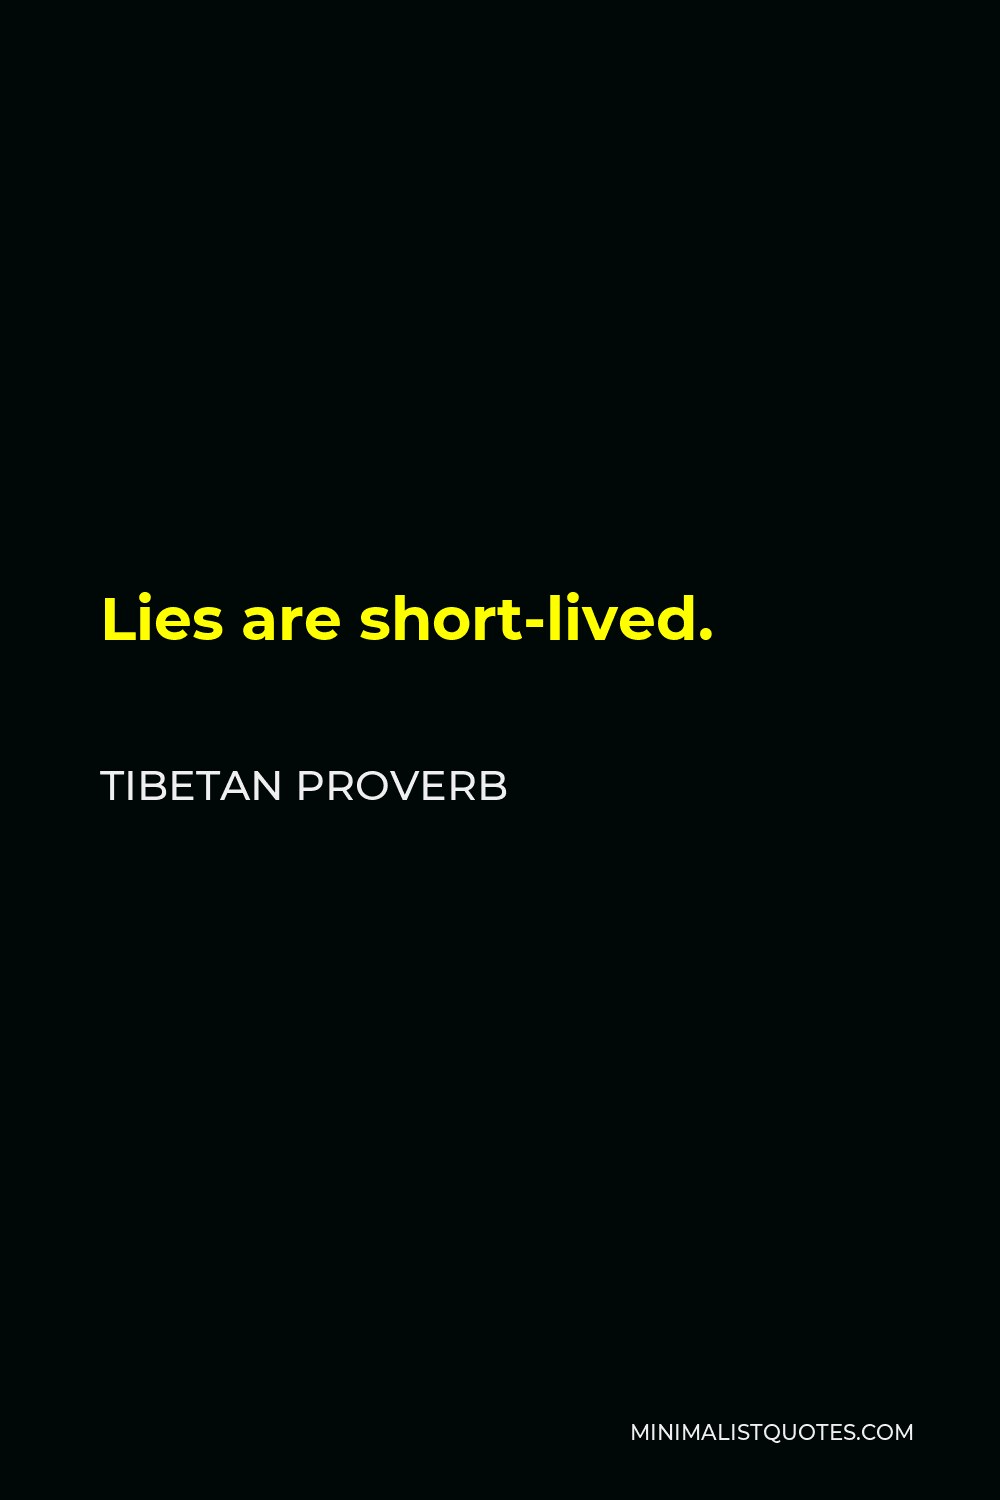 Tibetan Proverb Quote - Lies are short-lived.